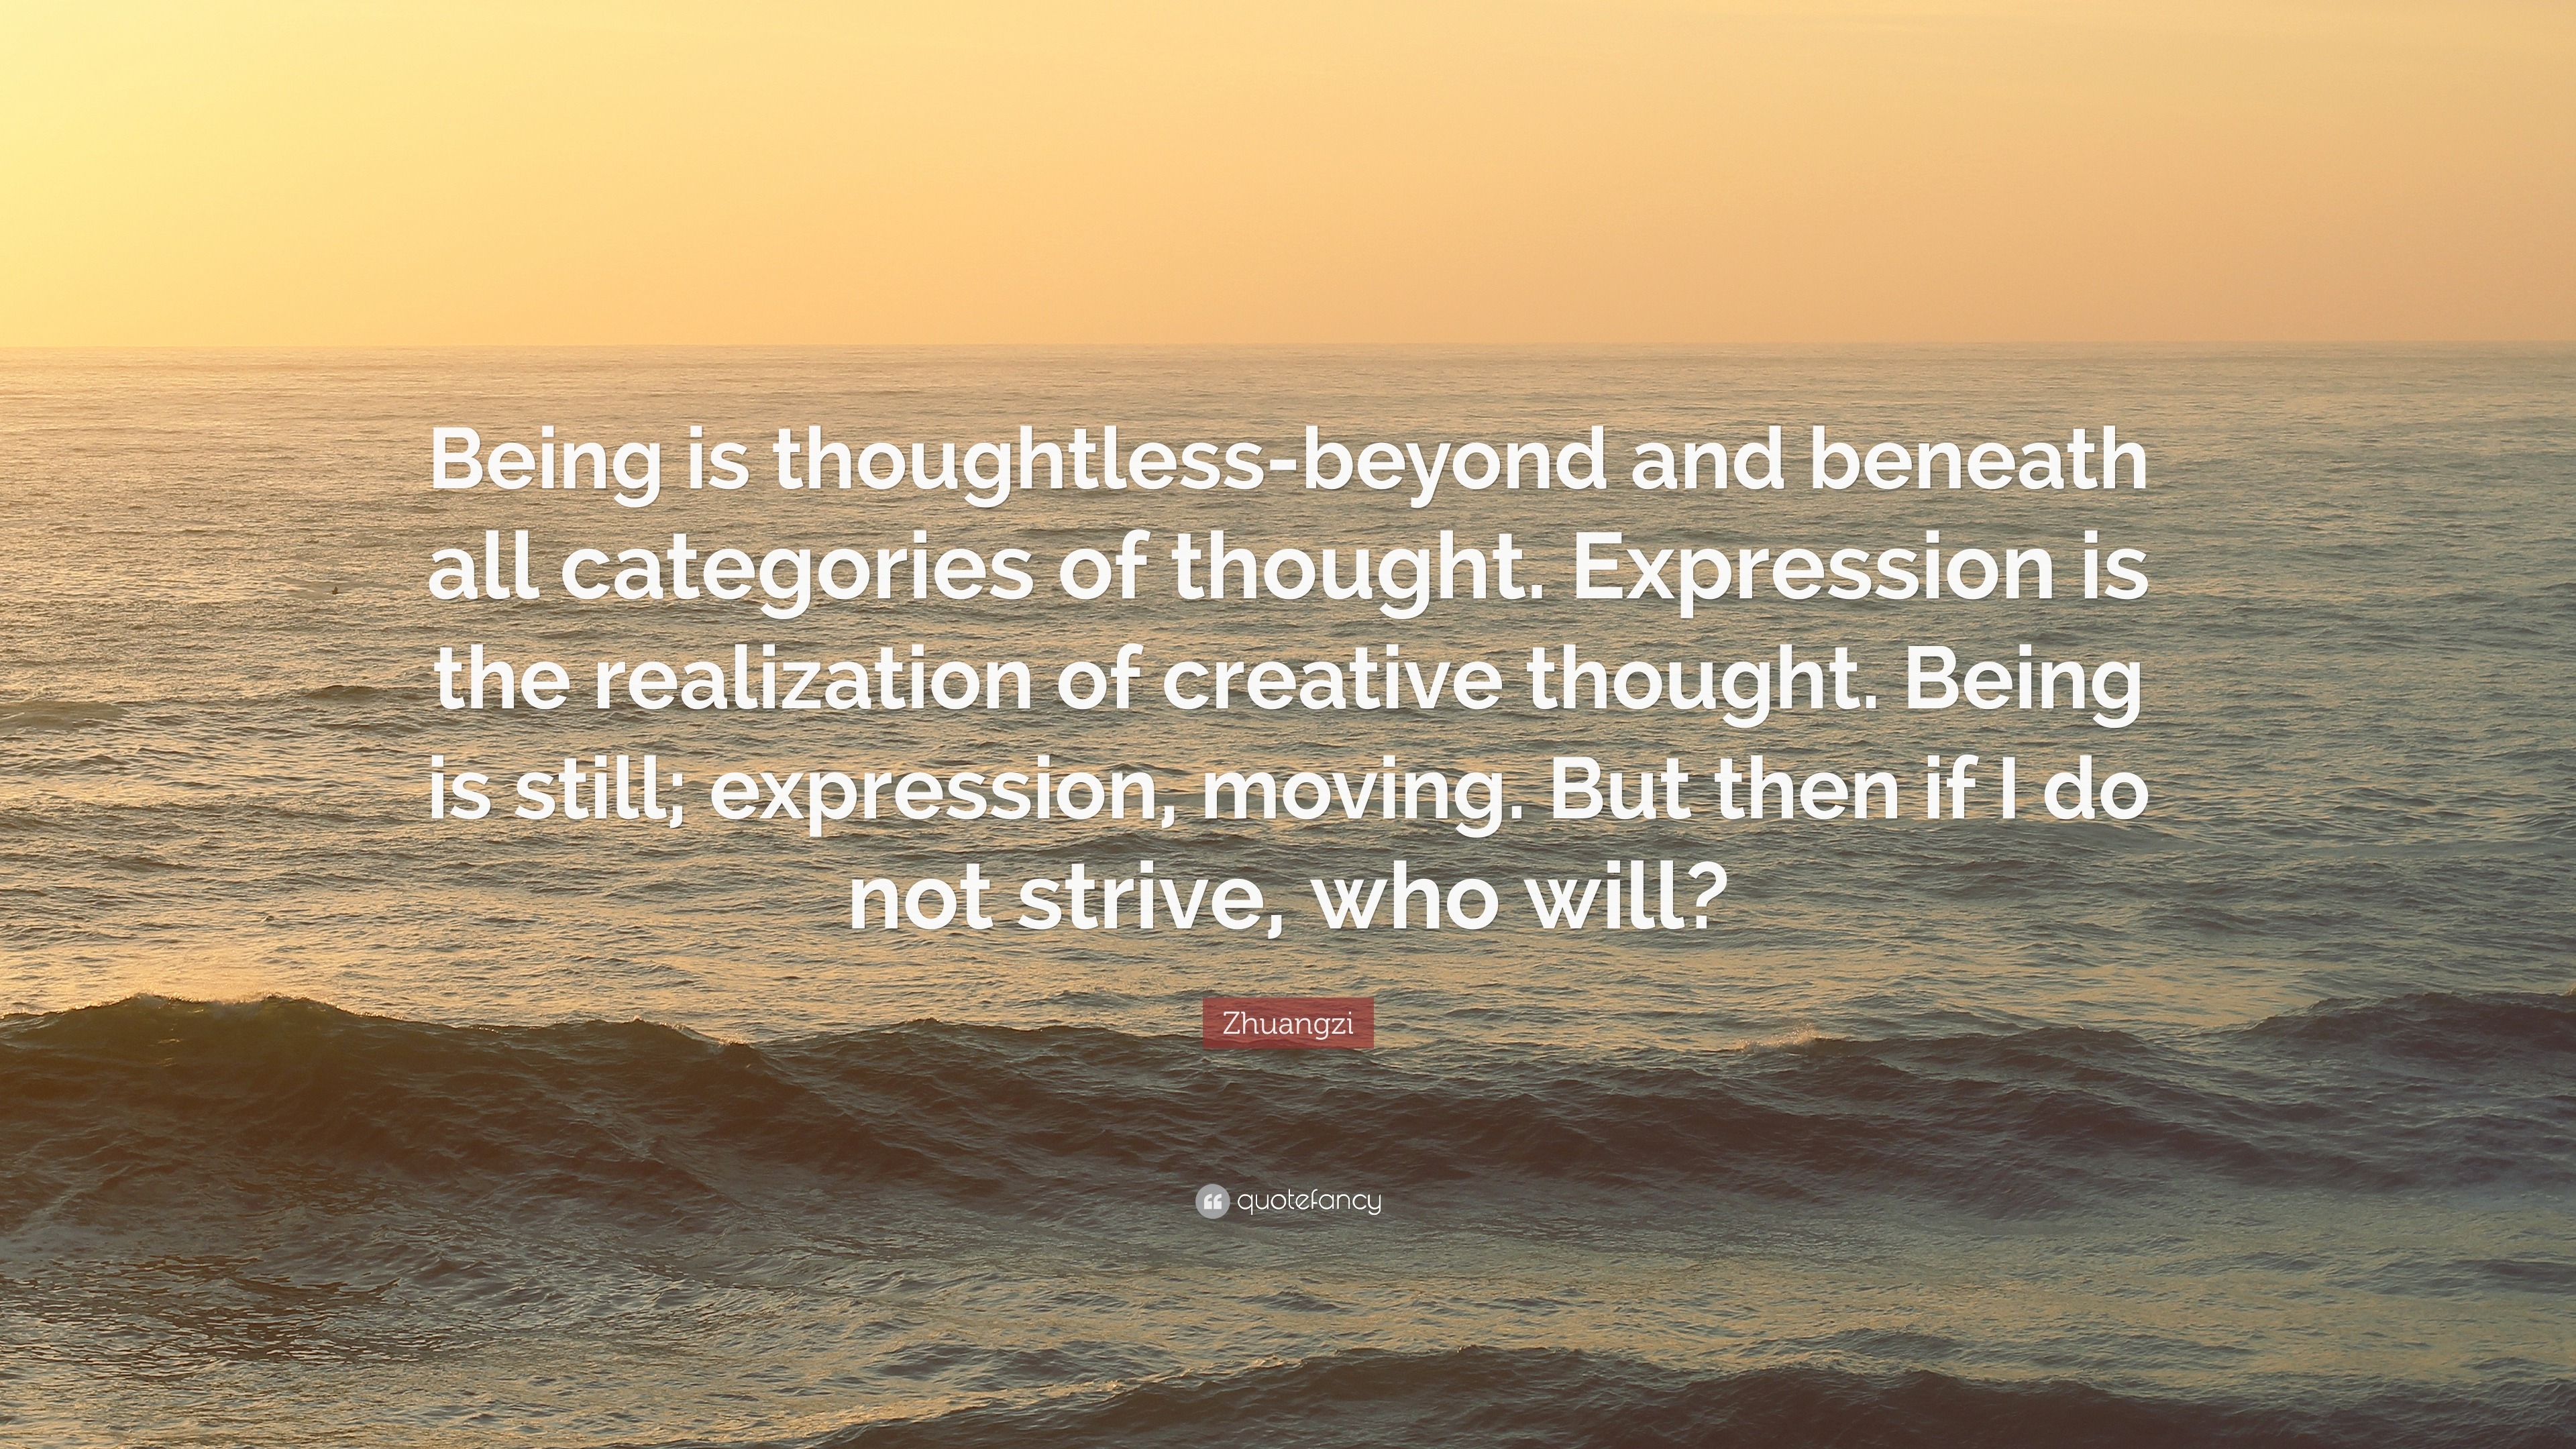 Zhuangzi Quote “Being is thoughtlessbeyond and beneath